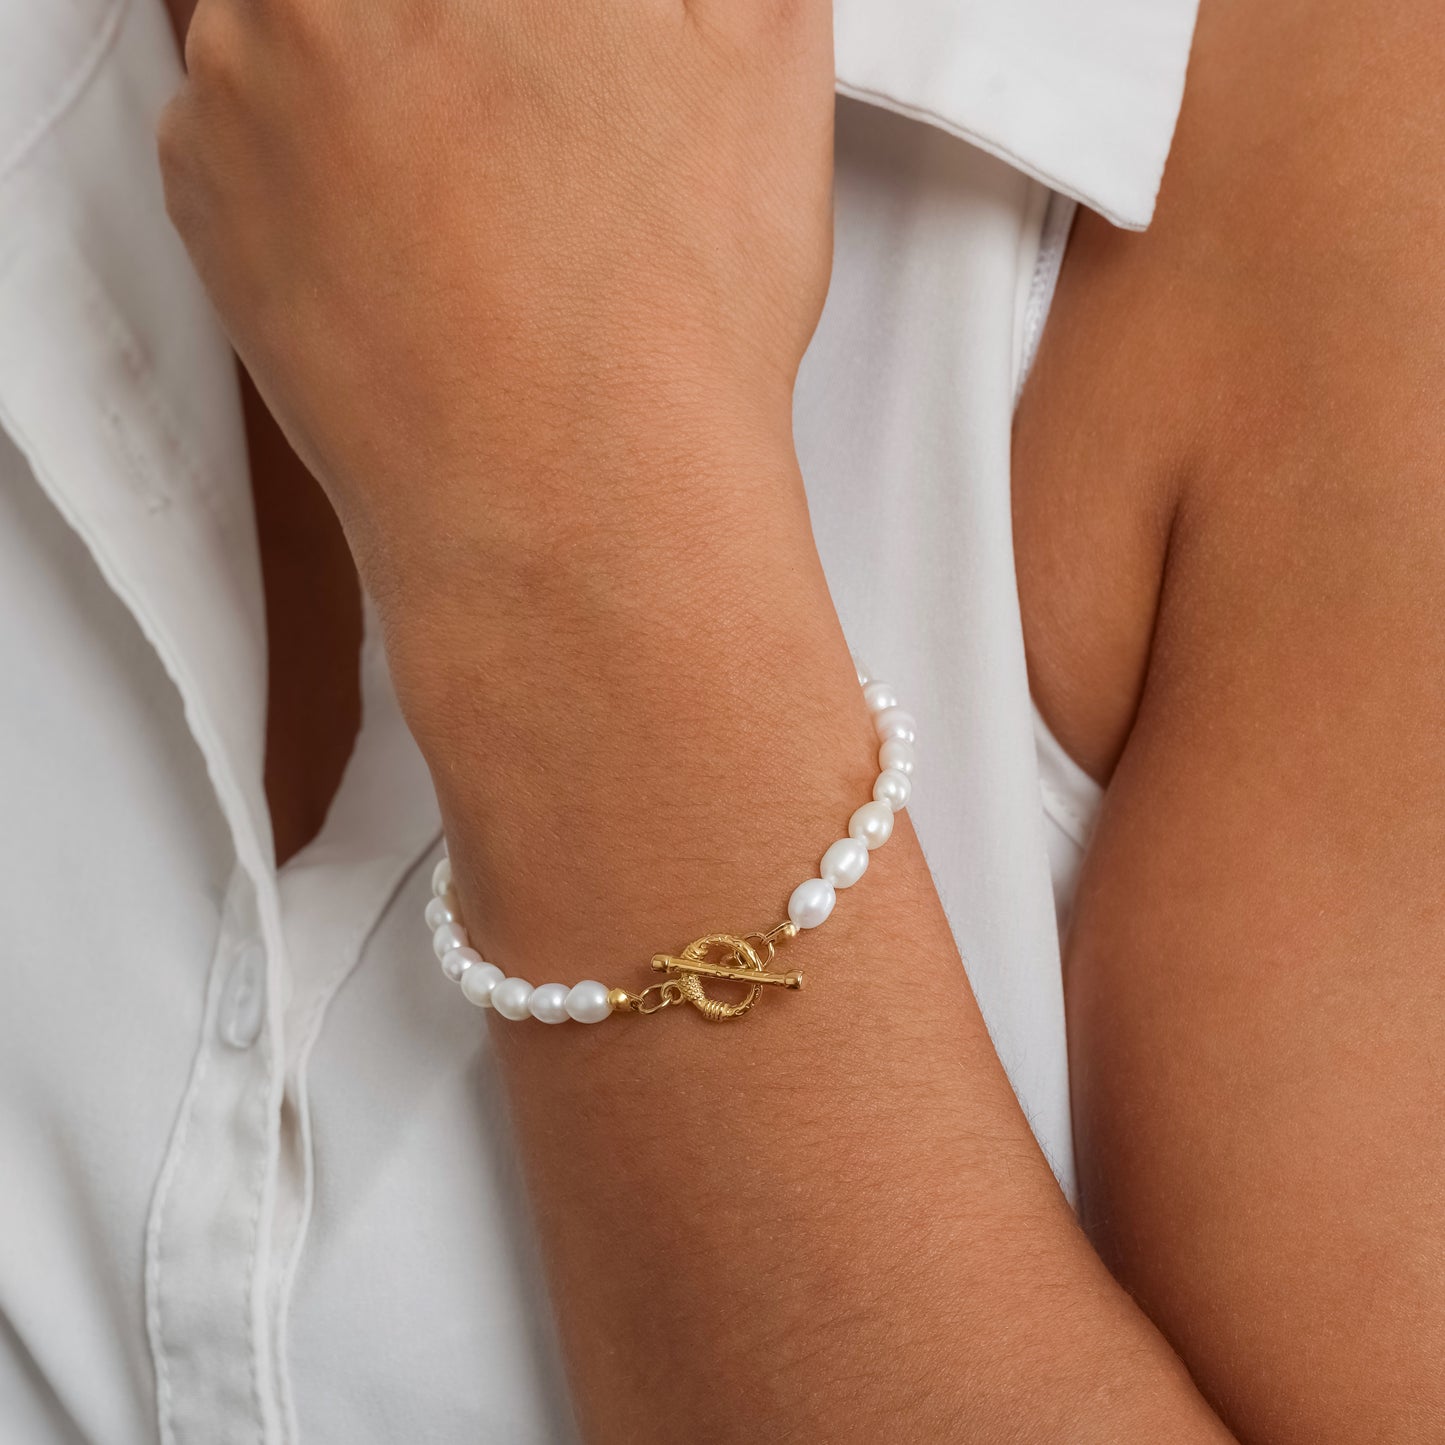 A model in a white sleeveless top wearing Toggle Clasp Pearl bracelet on her wrist.